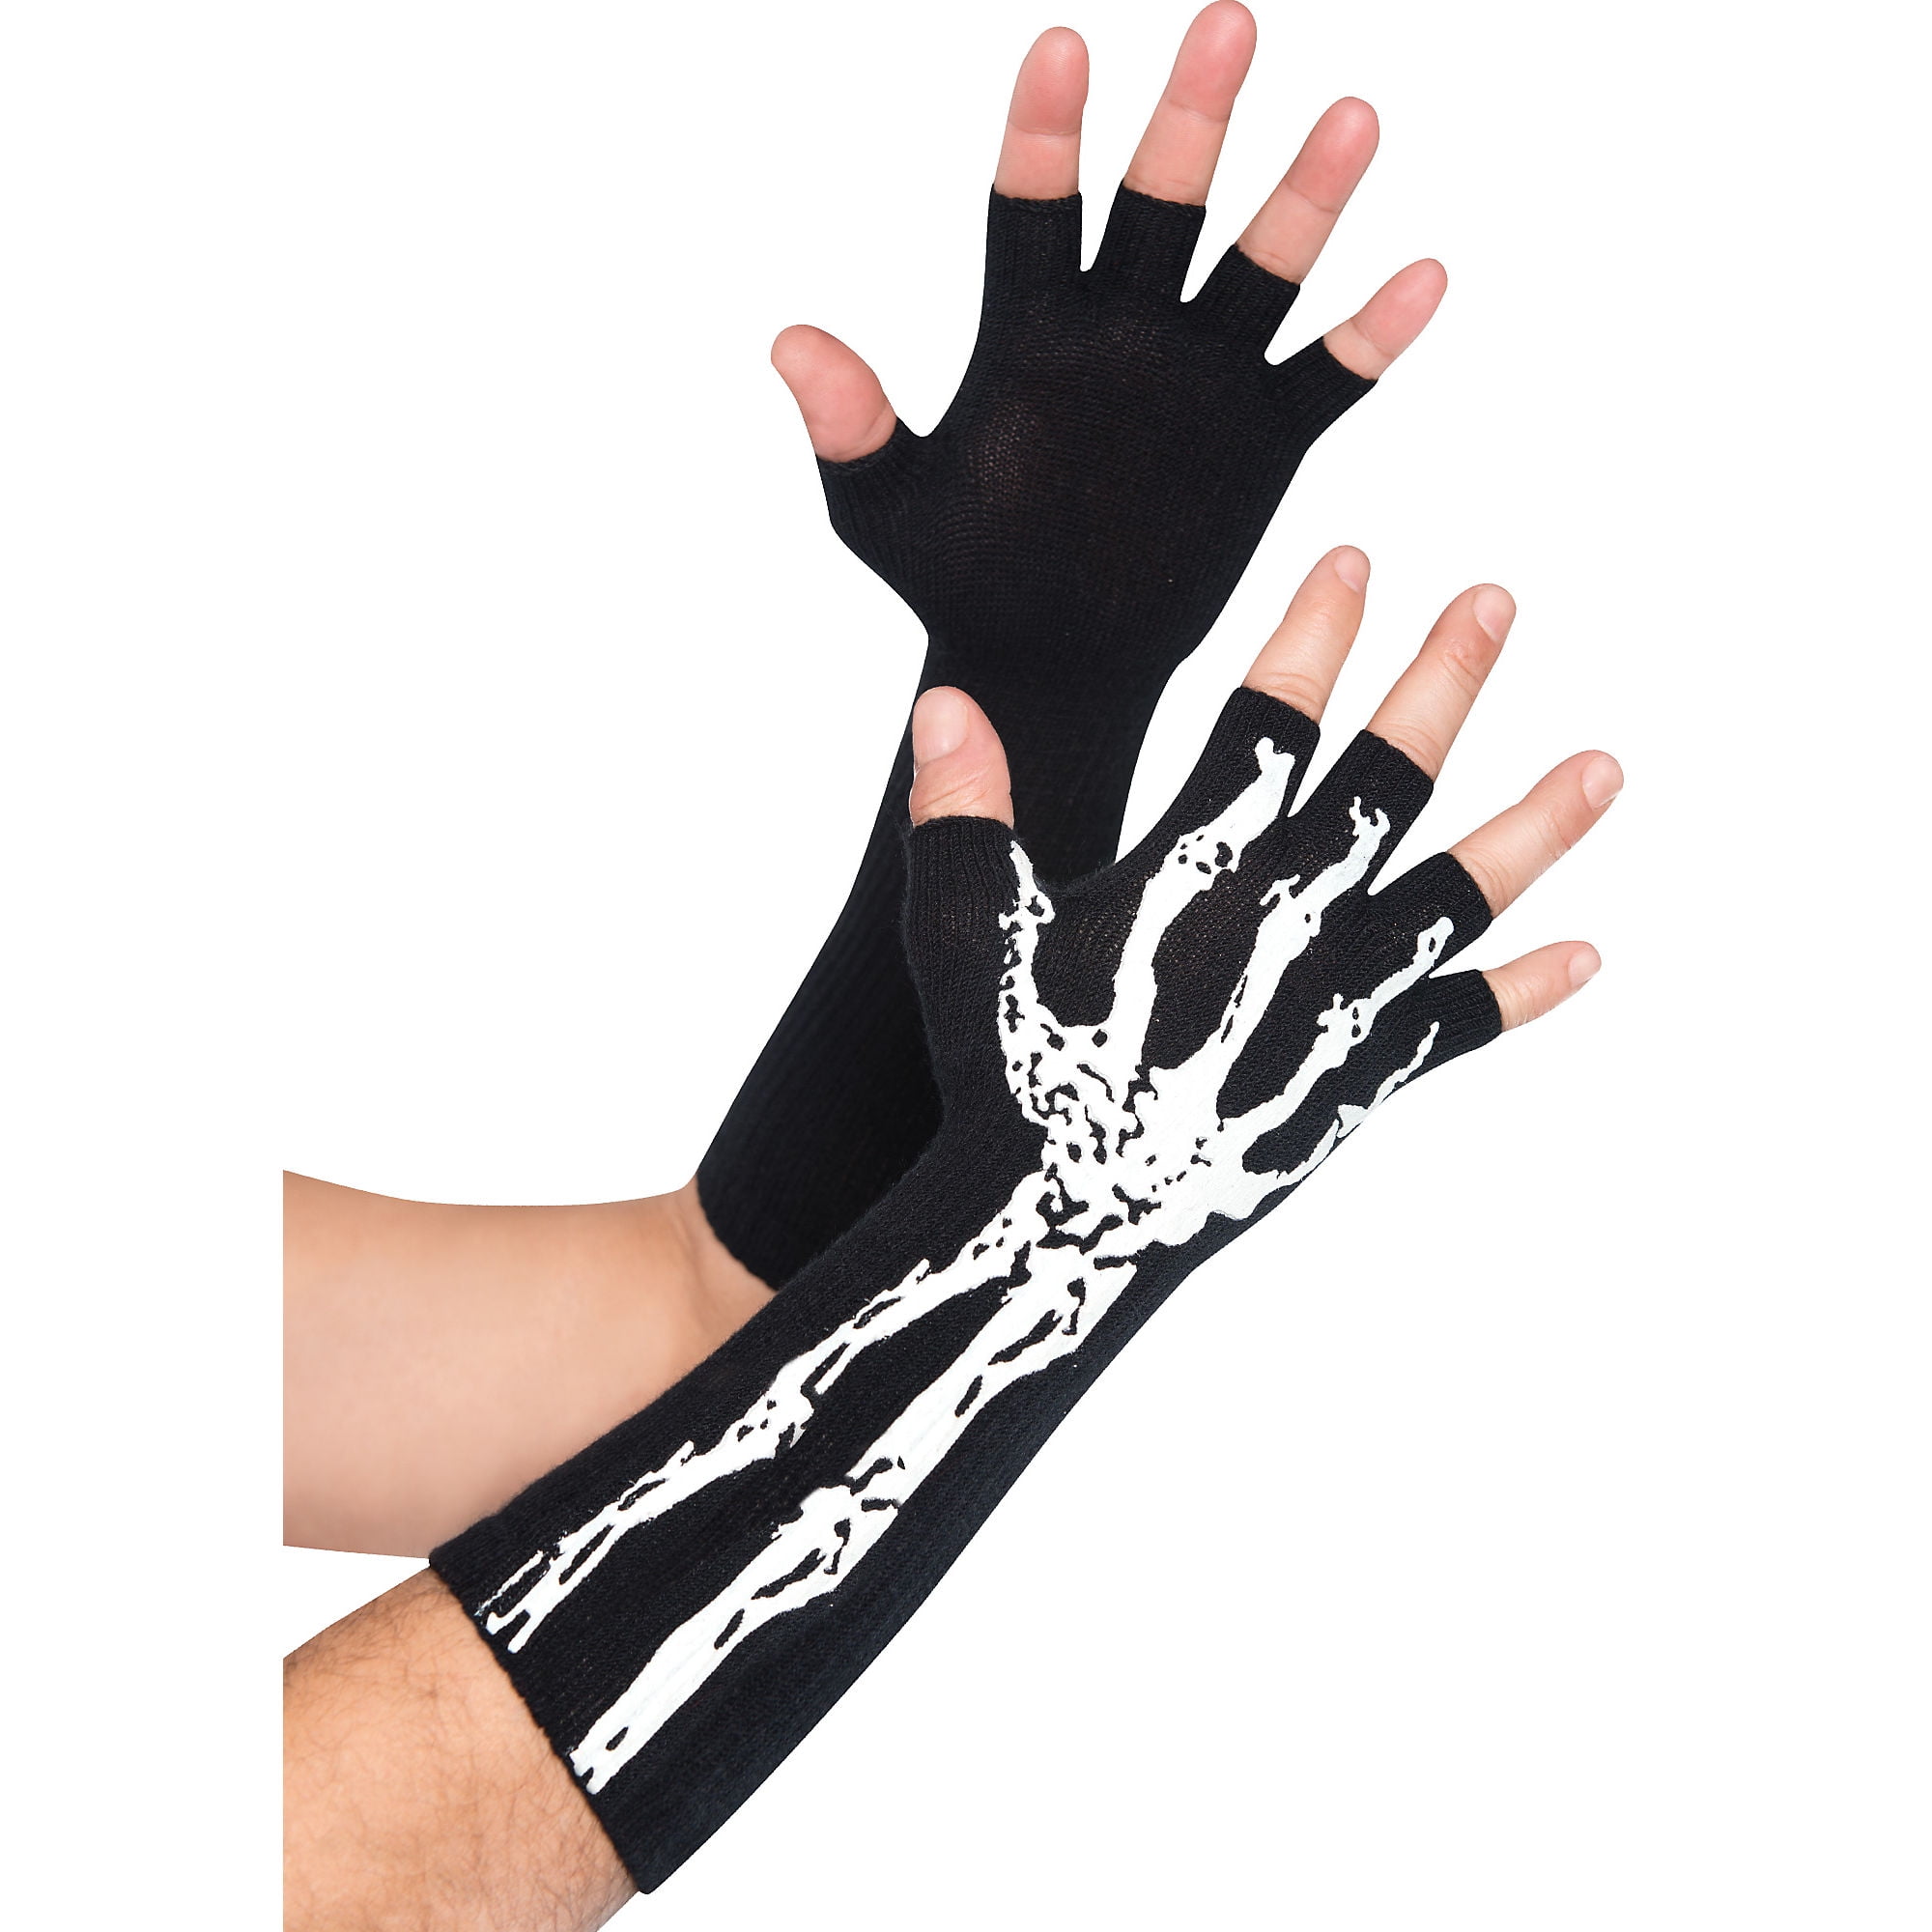 Skull Bone Gloves Glow in The Dark Touchscreen Stretchy Knit Warm Gloves for Adults 2 Pairs CROSSFINGERS Skeleton Gloves for Halloween Costume Cosplay Accessories